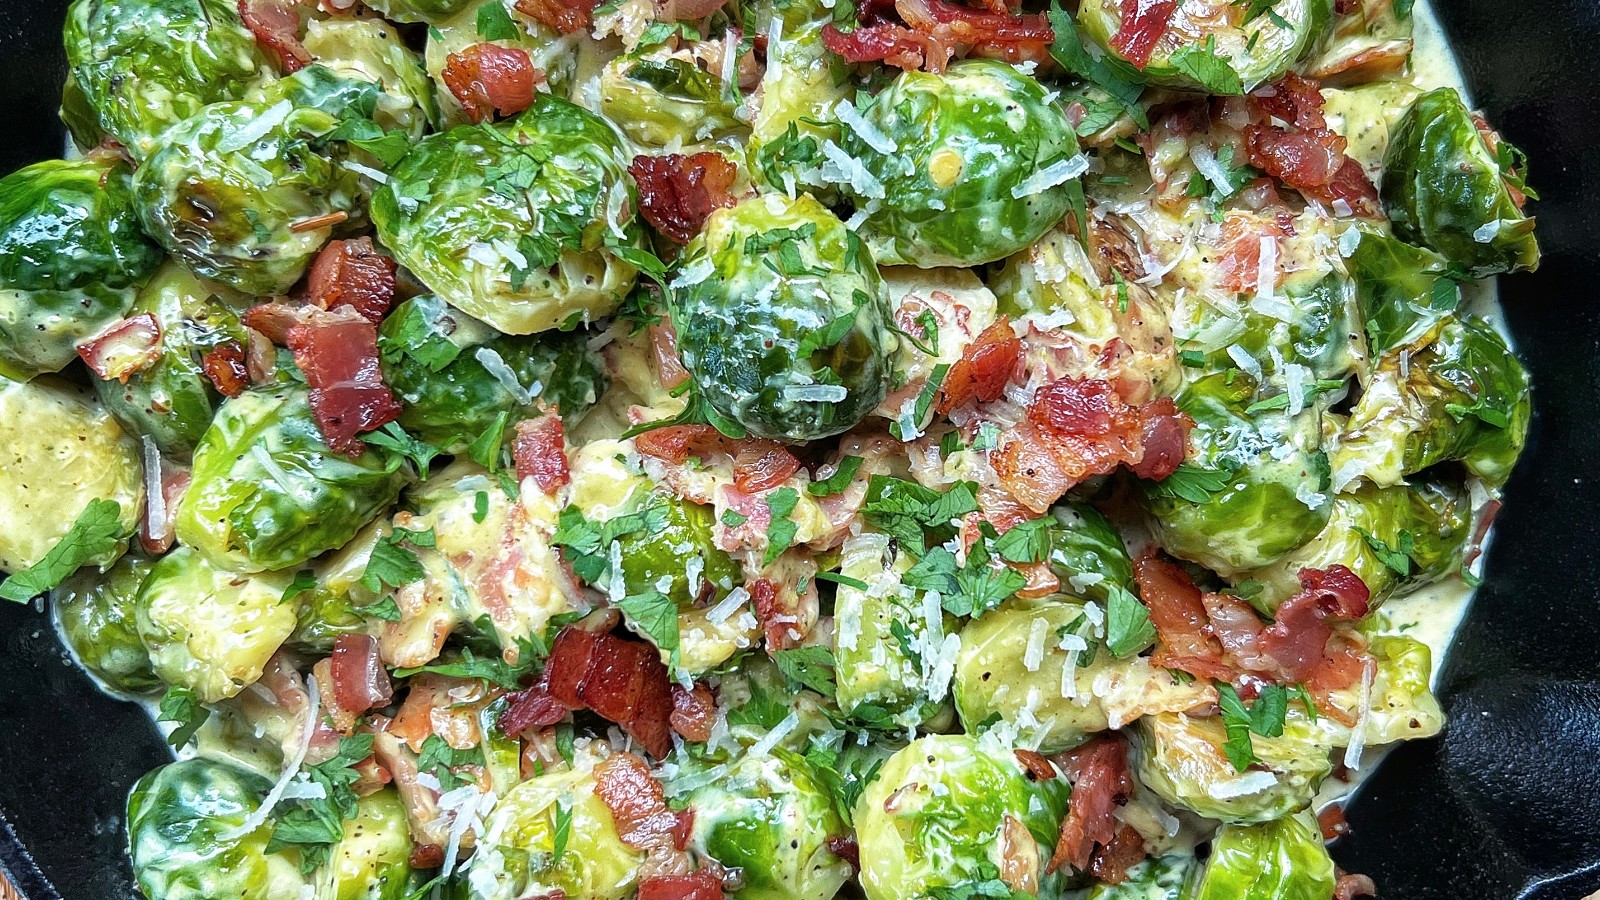 Image of Creamy Garlic & Herb Brussel Sprouts